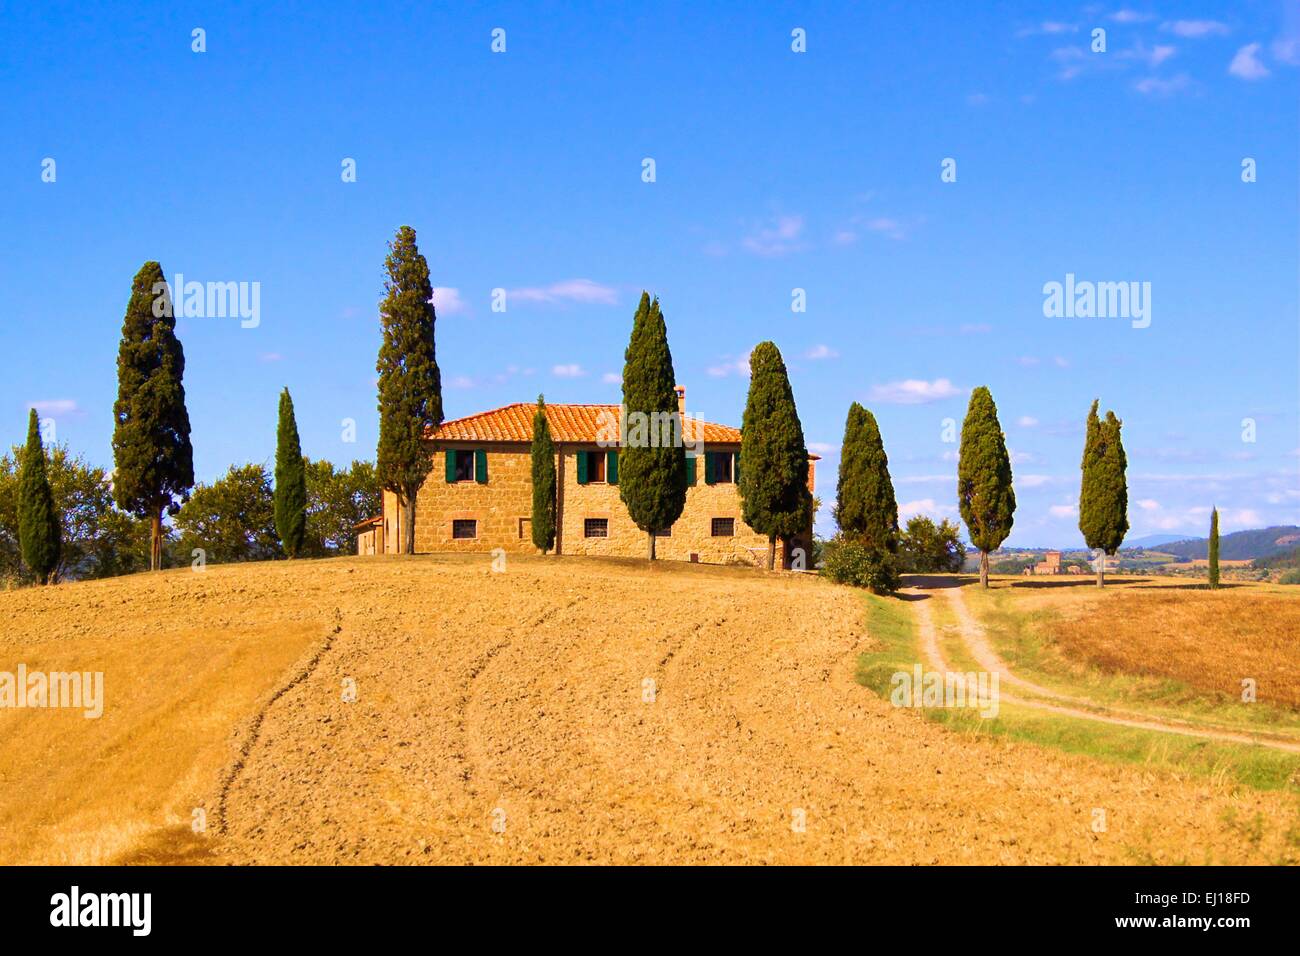 Classic Tuscan landscape with stone house and row of cypress trees, Italy Stock Photo